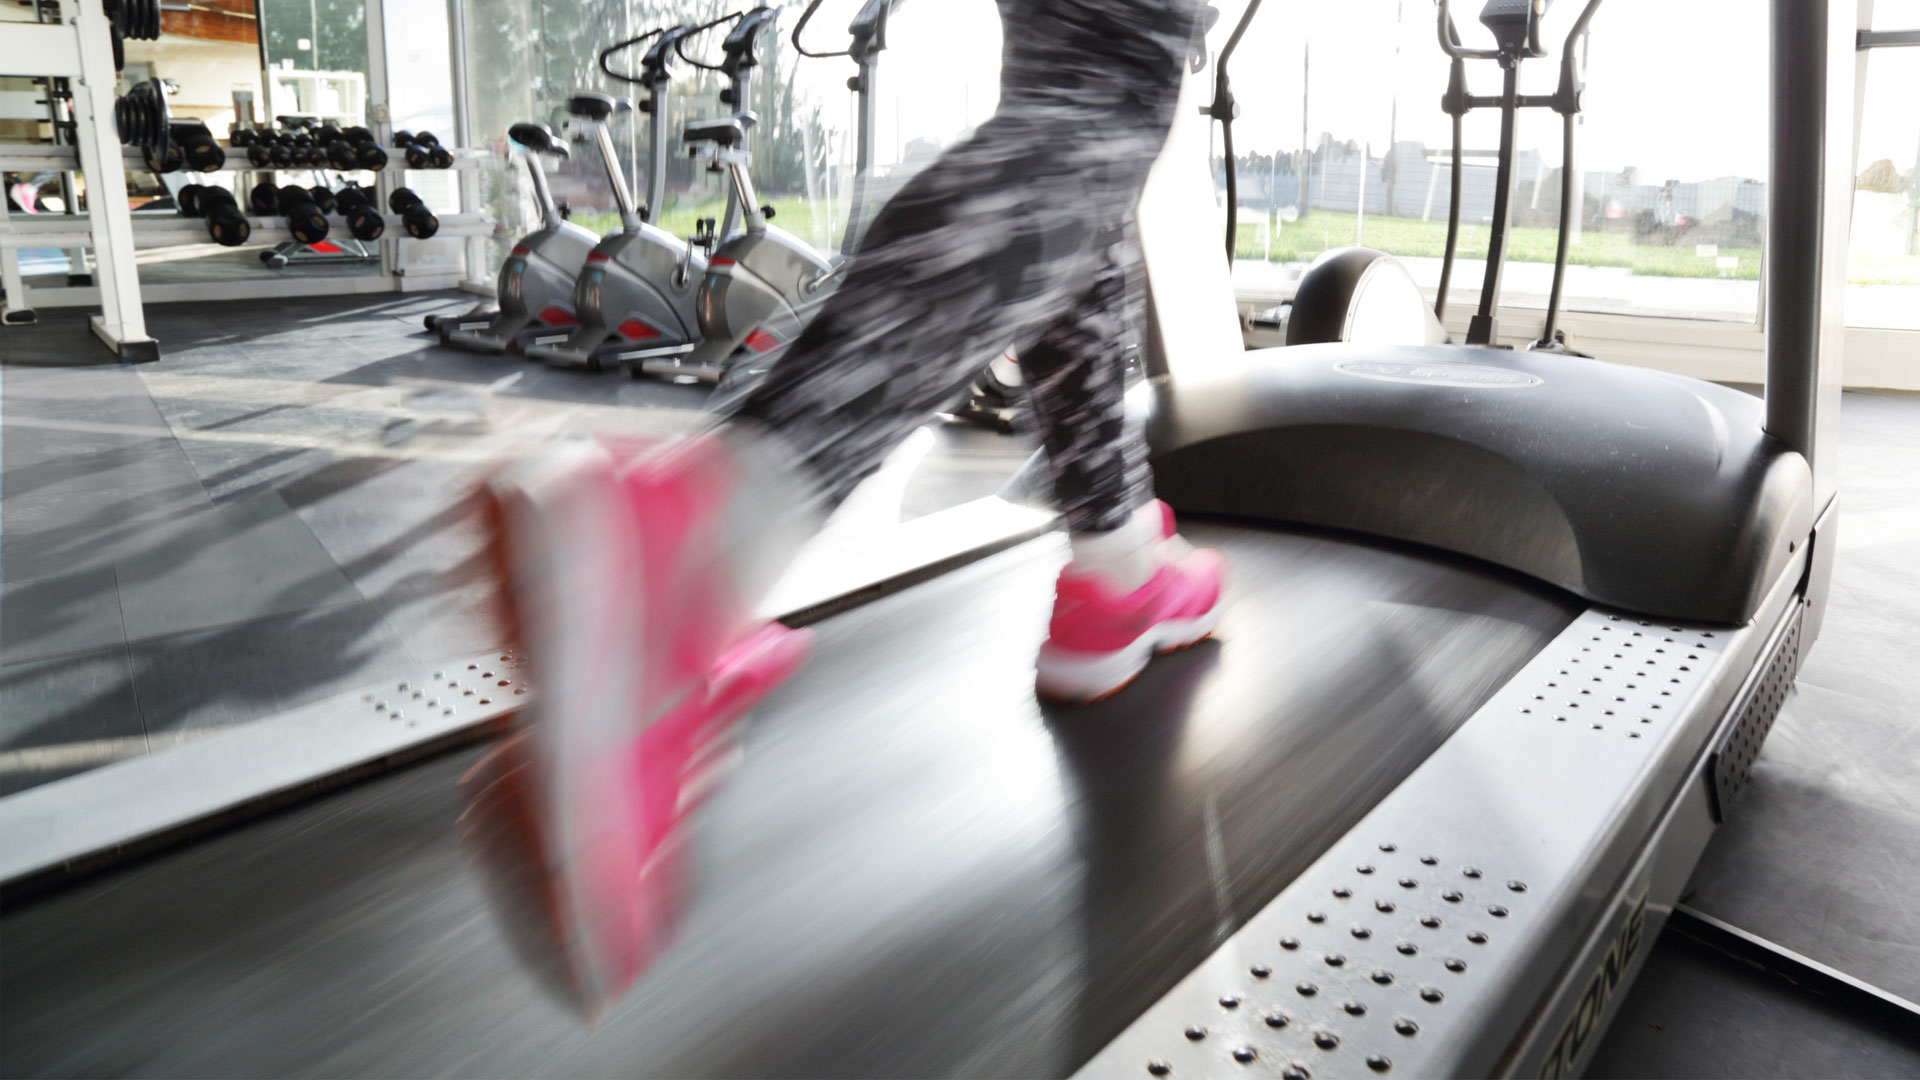 Rowing Machines vs Treadmills: Which is best for home use? image of runner's feet on treadmill